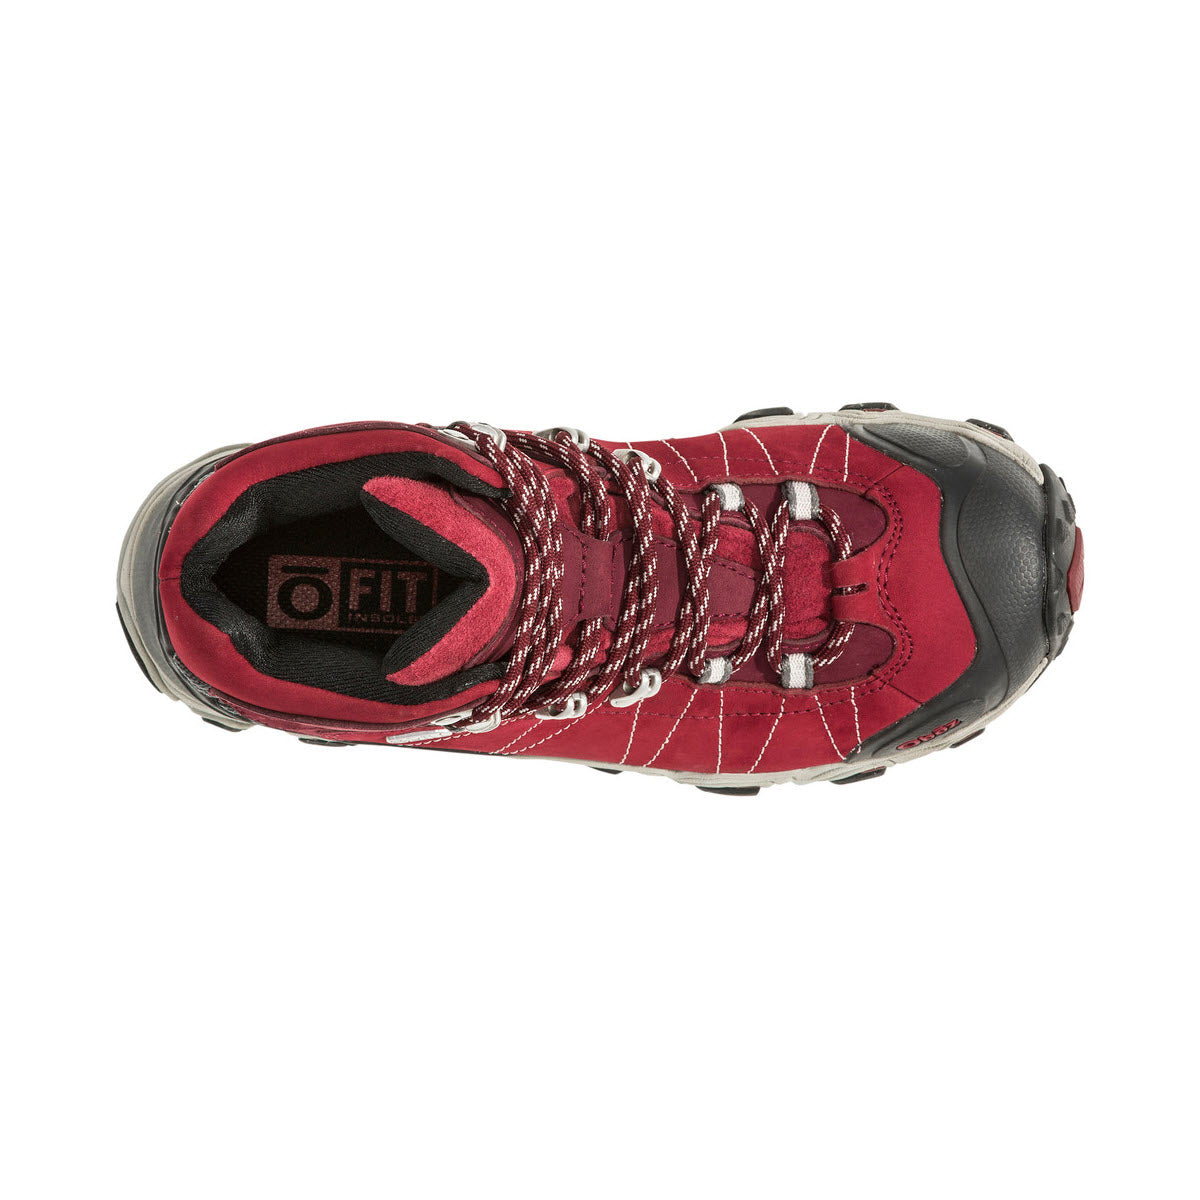 Top view of a OBOZ BRIDGER MID BDRY RIO RED - WOMENS hiking shoe with laced-up detail, displaying inner sole branding and featuring B-DRY waterproofing.